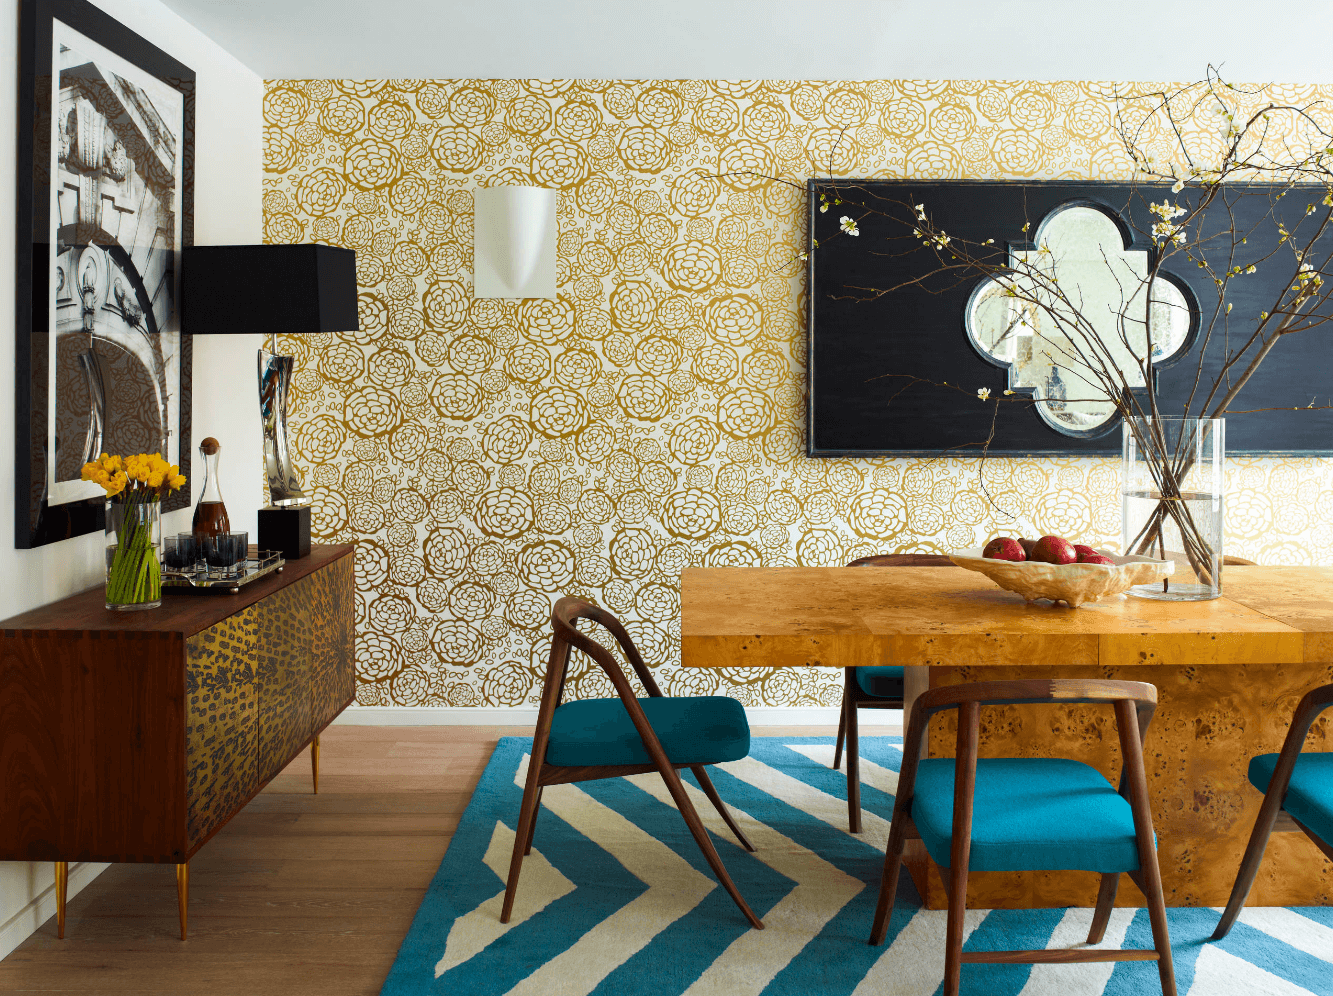 How to Transform A Room By Decorating With Wallpaper - No Vacancy